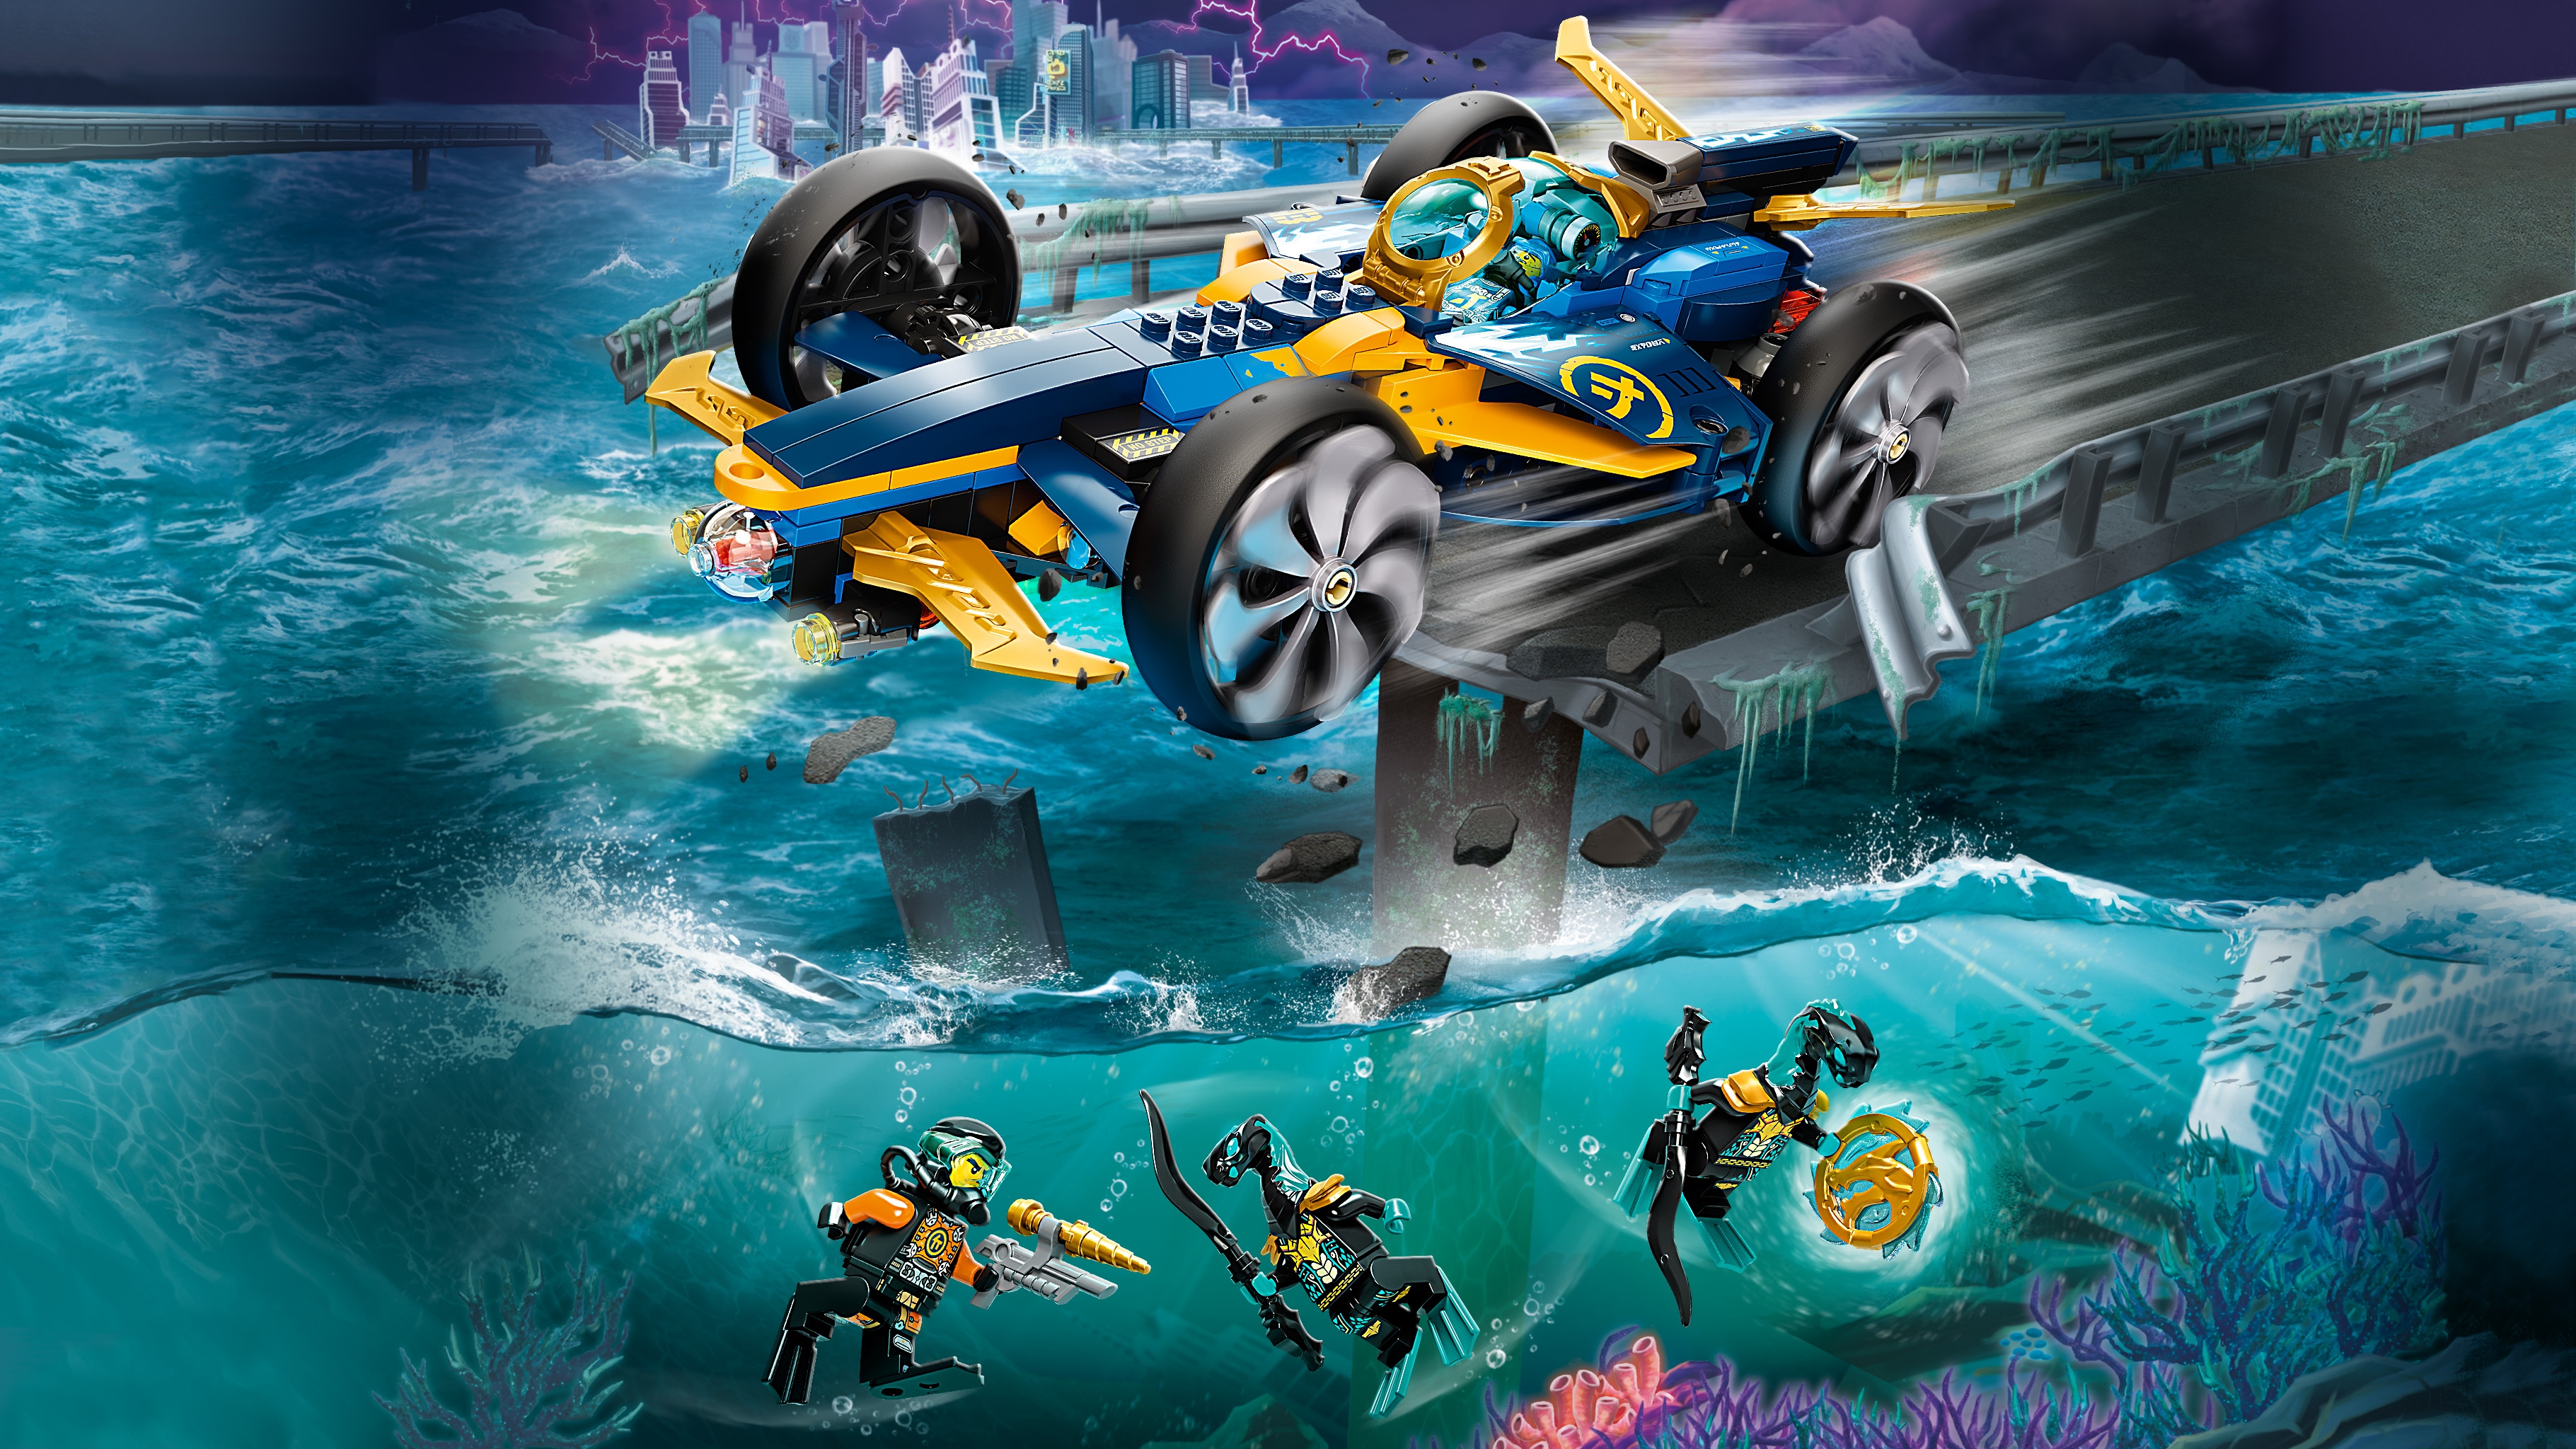 Get ready for the new NINJAGO® Dragons Rising TV series! - LEGO.com for kids